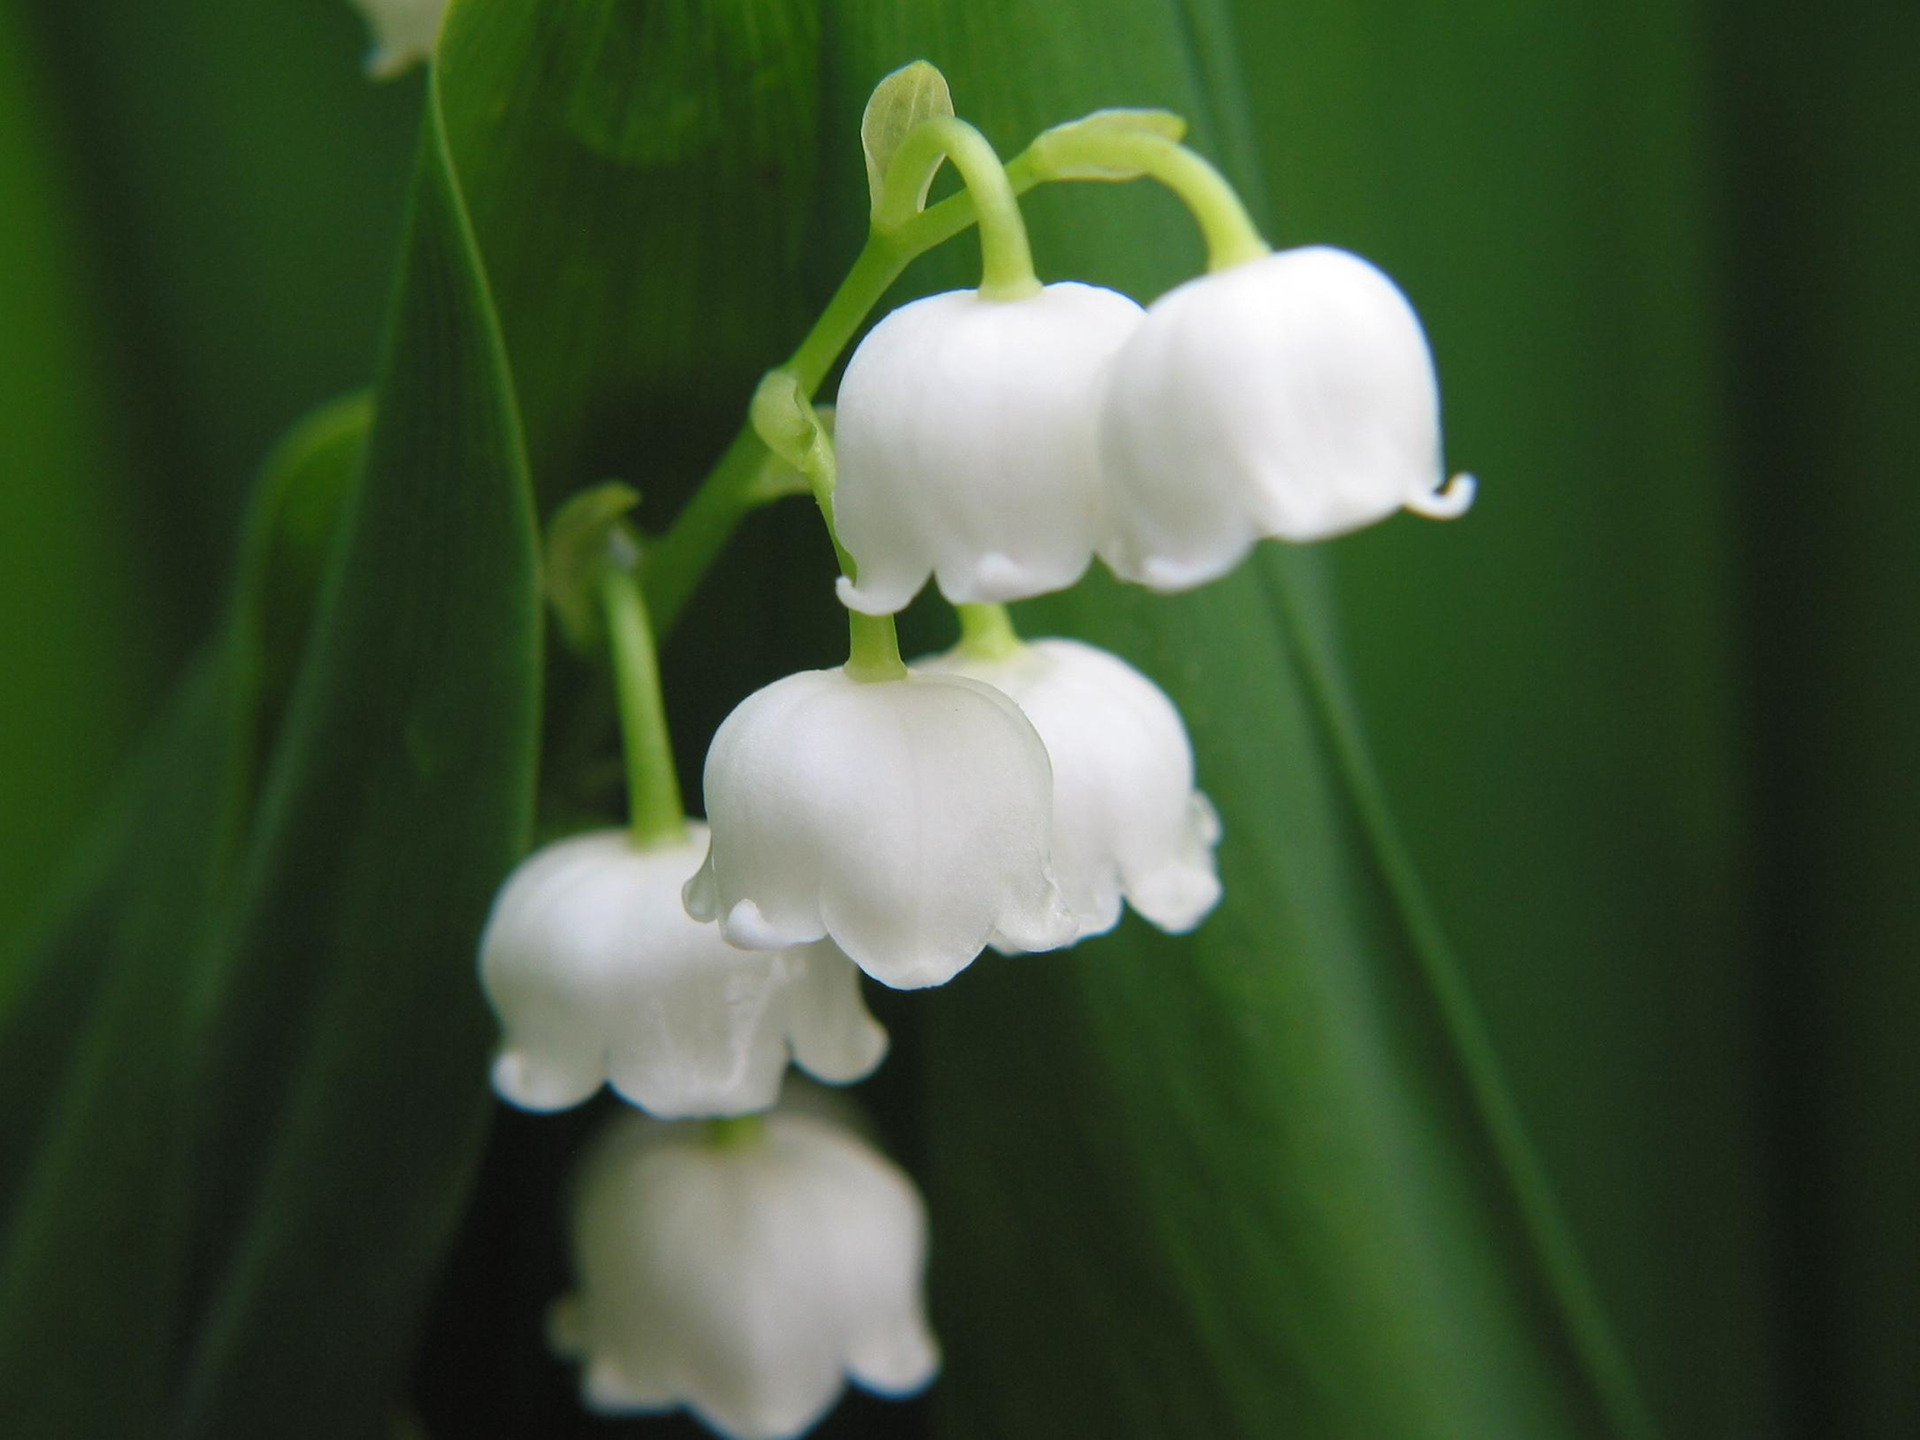 lily of the valley, earth, flower, nature, white flower, flowers